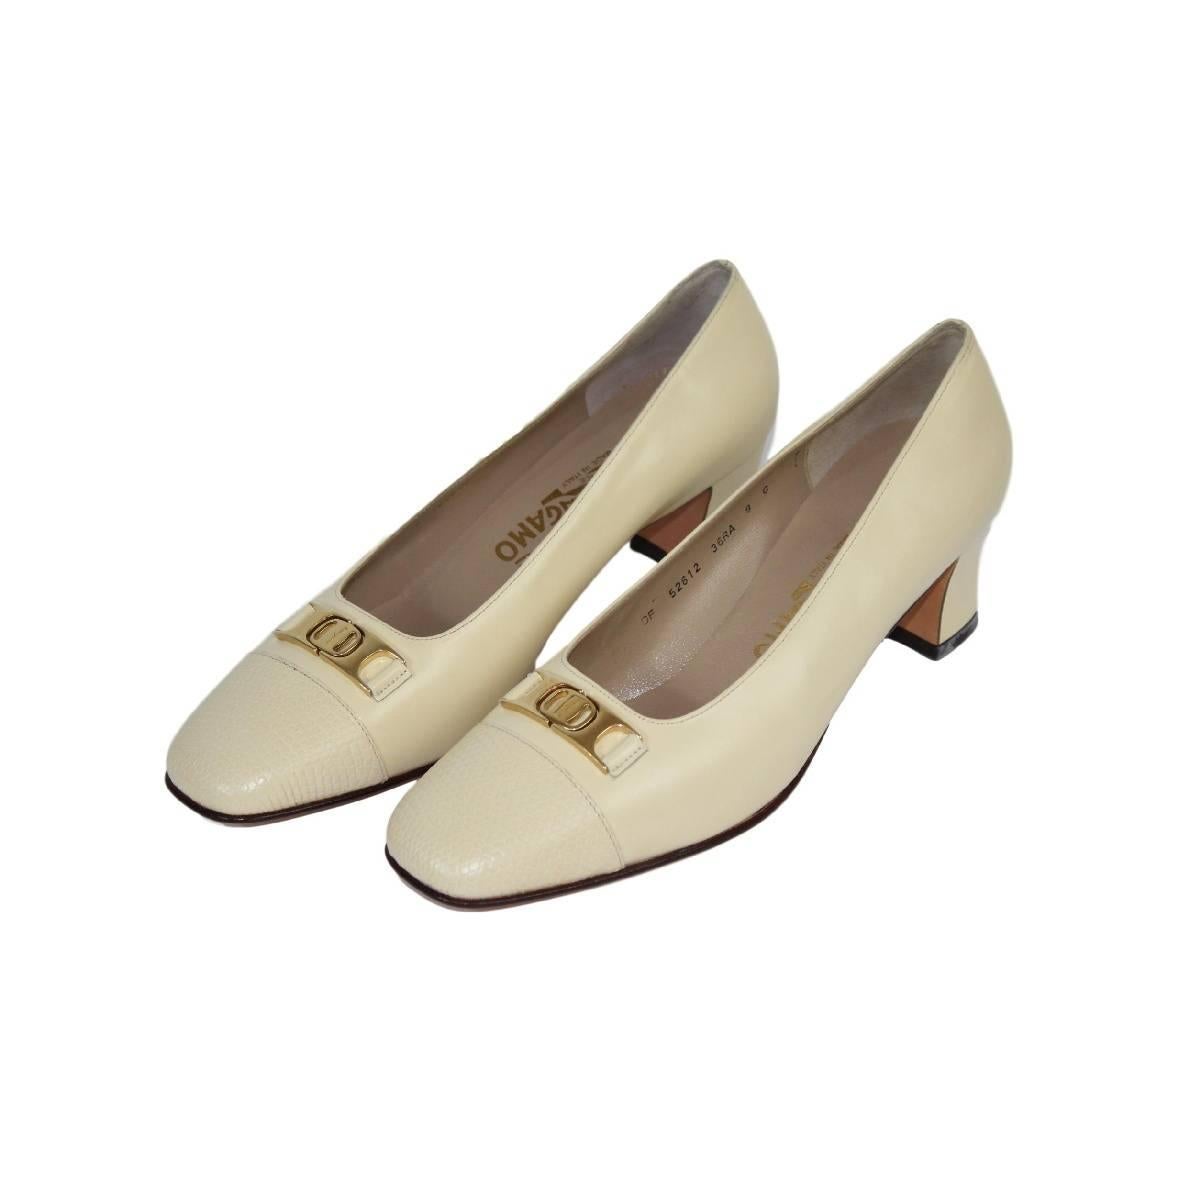 Salvatore Ferragamo ivory leather shoes NWT women's size 9 us made italy new  For Sale